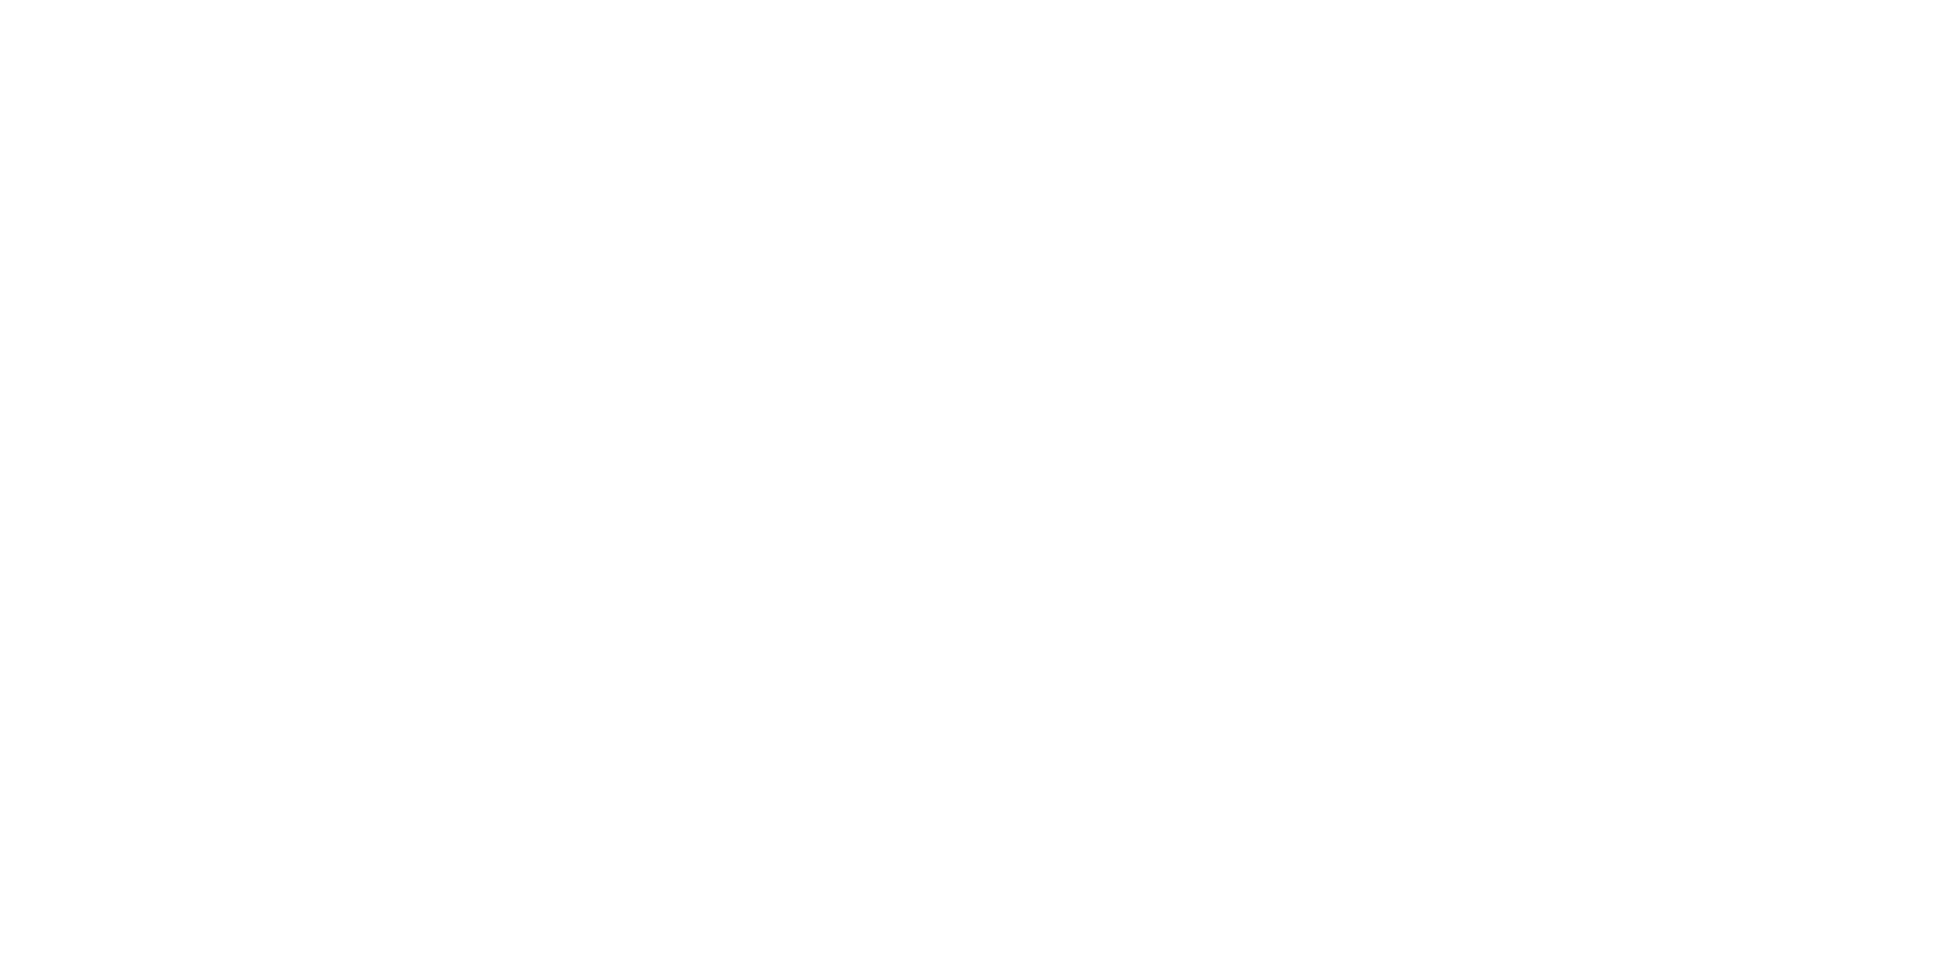 Together for a healthy future